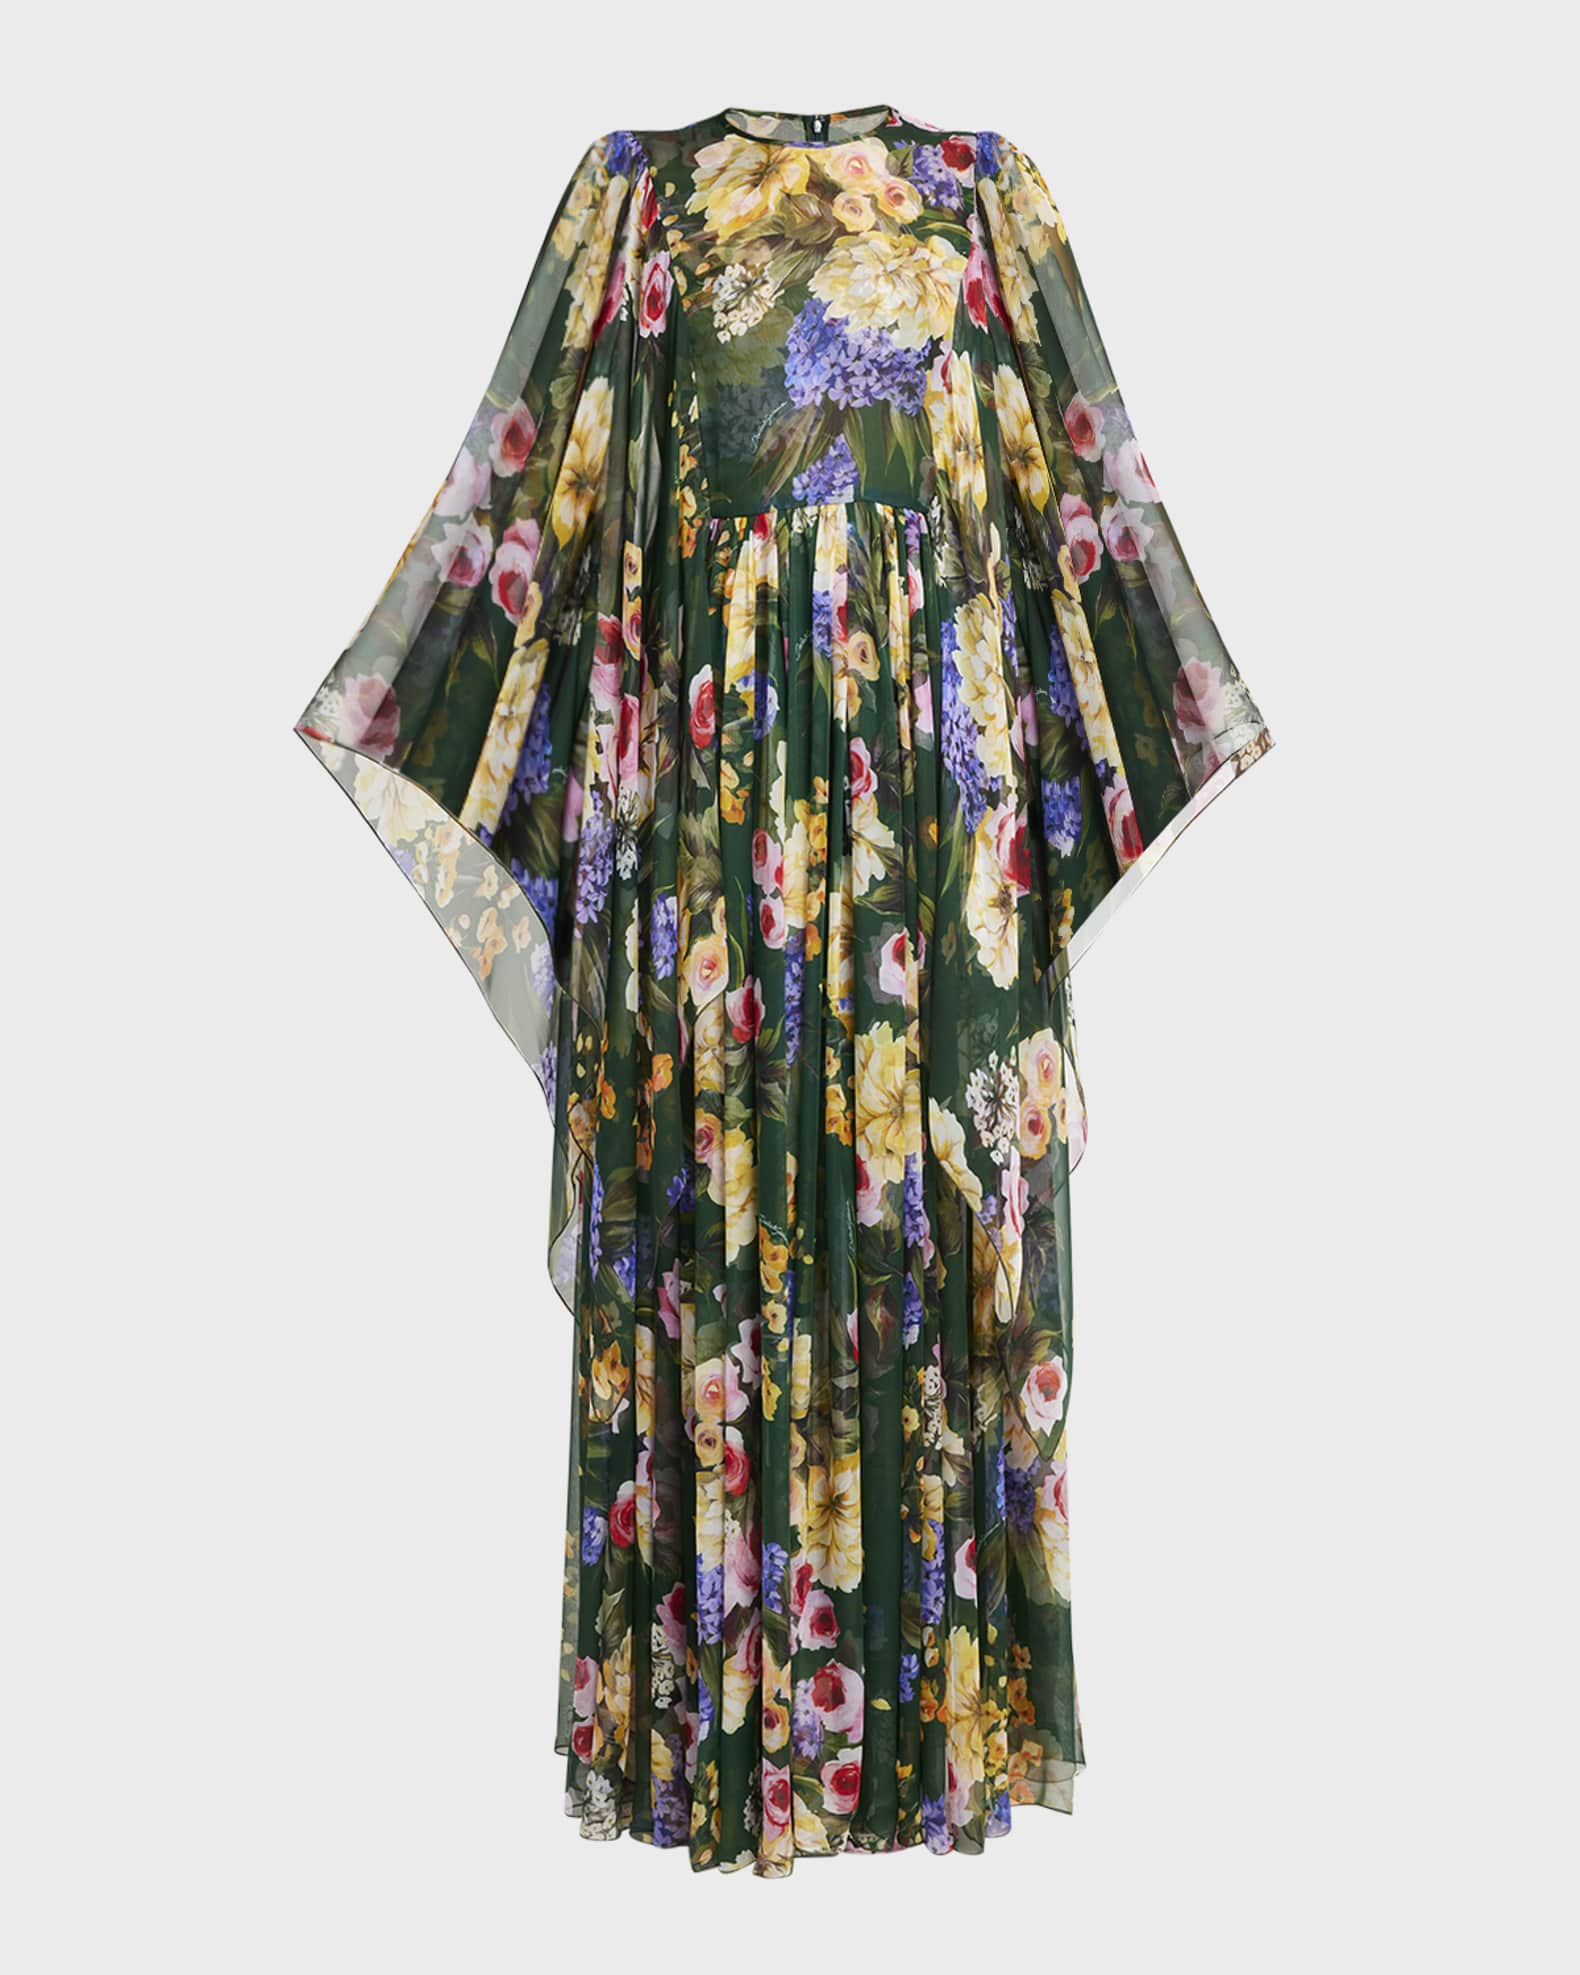 Dolce&Gabbana Floral Print Chiffon Gown with Cape Sleeves | Neiman Marcus